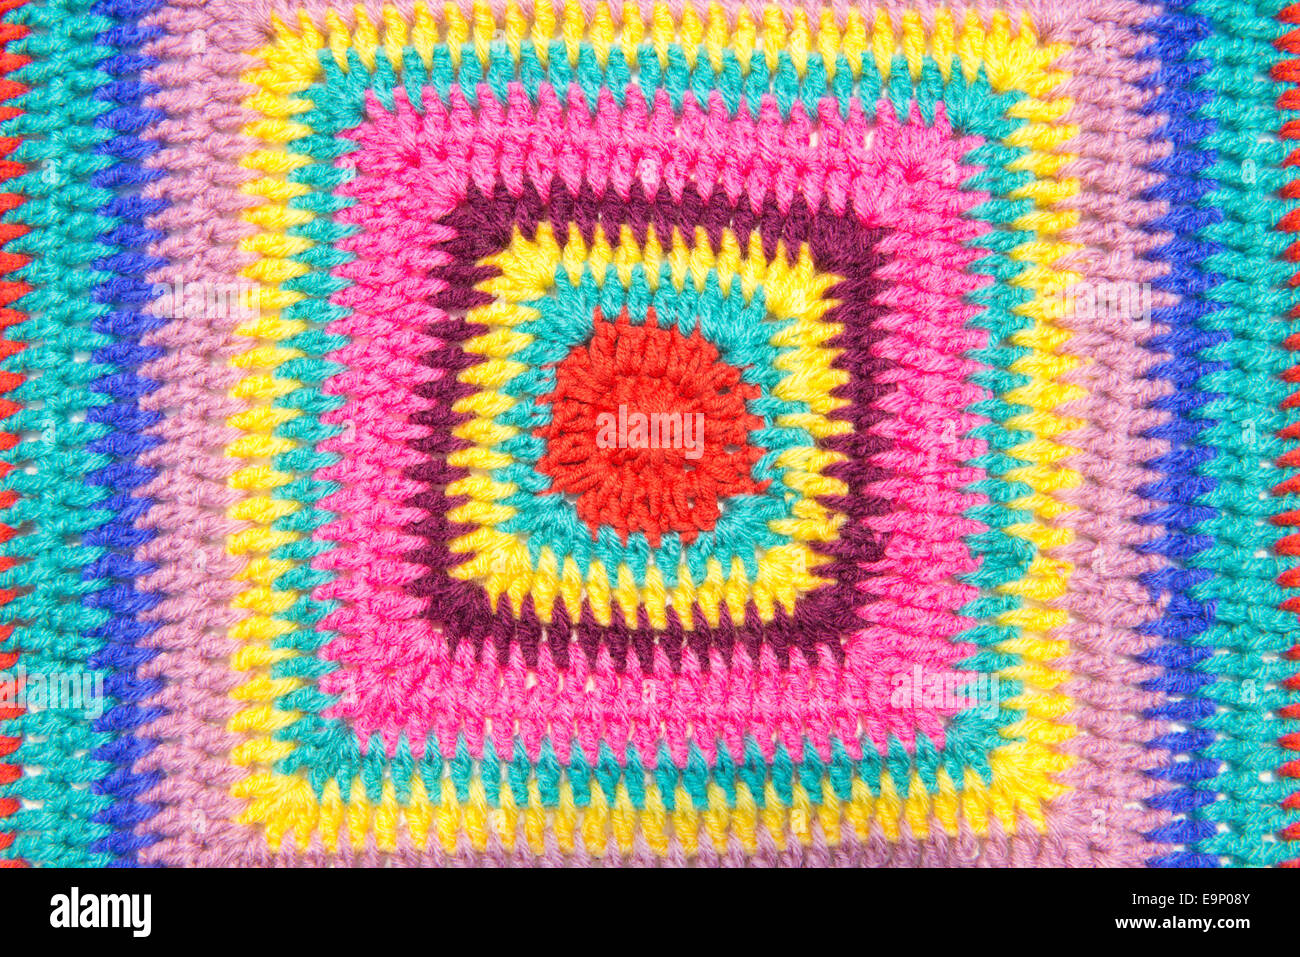 Colseup of crochet colorful fabric pattern. Homemade. Stock Photo